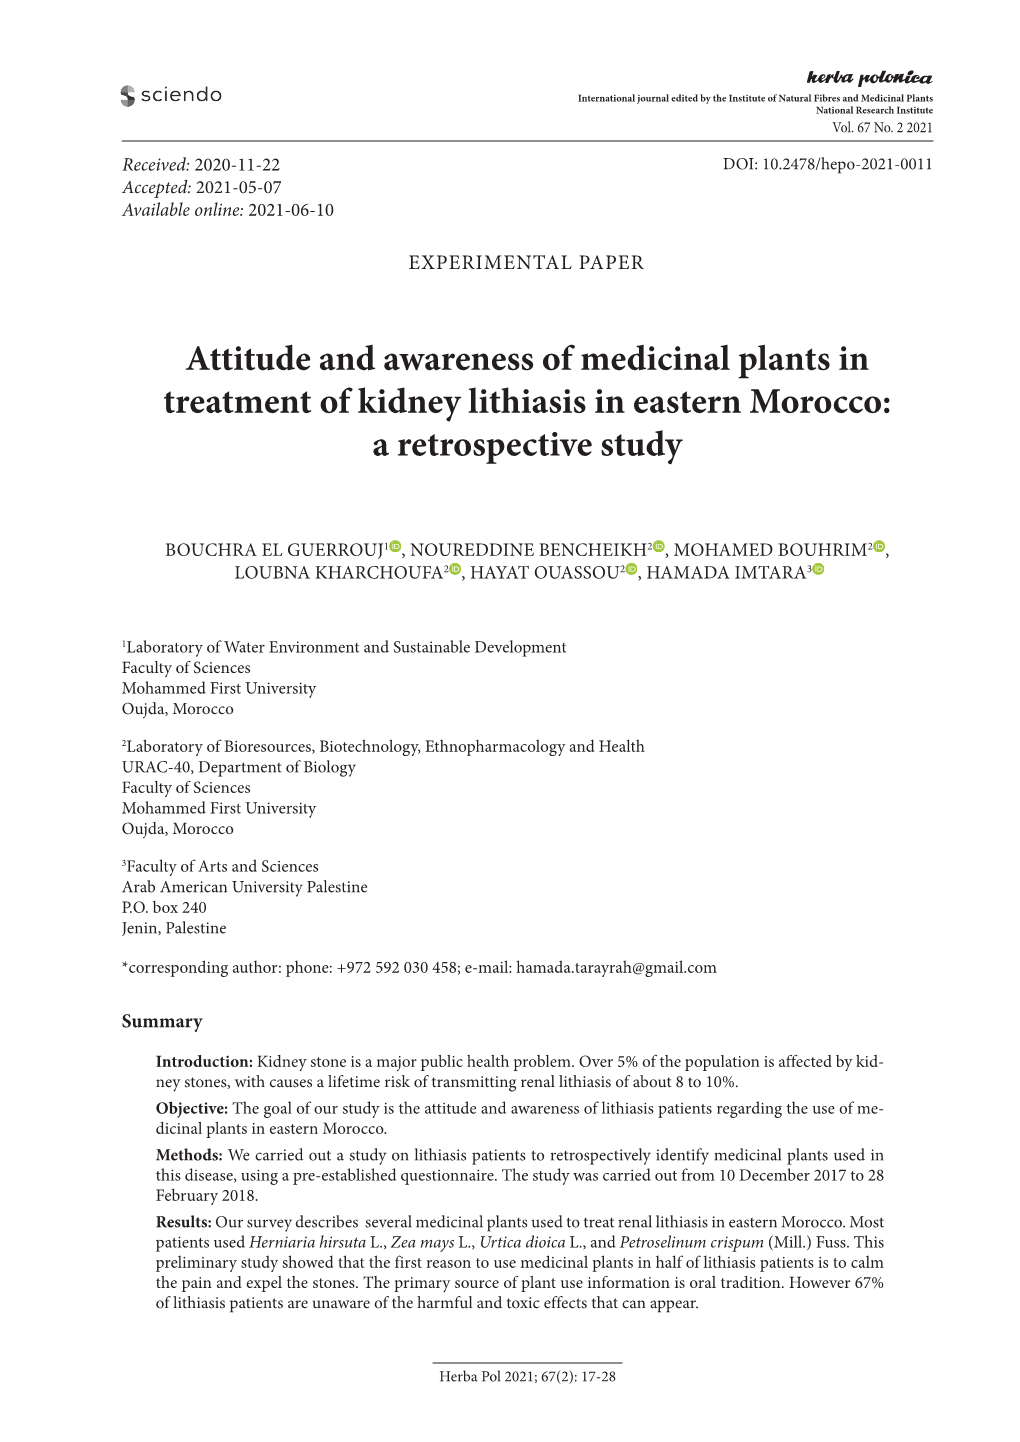 Attitude and Awareness of Medicinal Plants in Treatment of Kidney Lithiasis in Eastern Morocco: a Retrospective Study